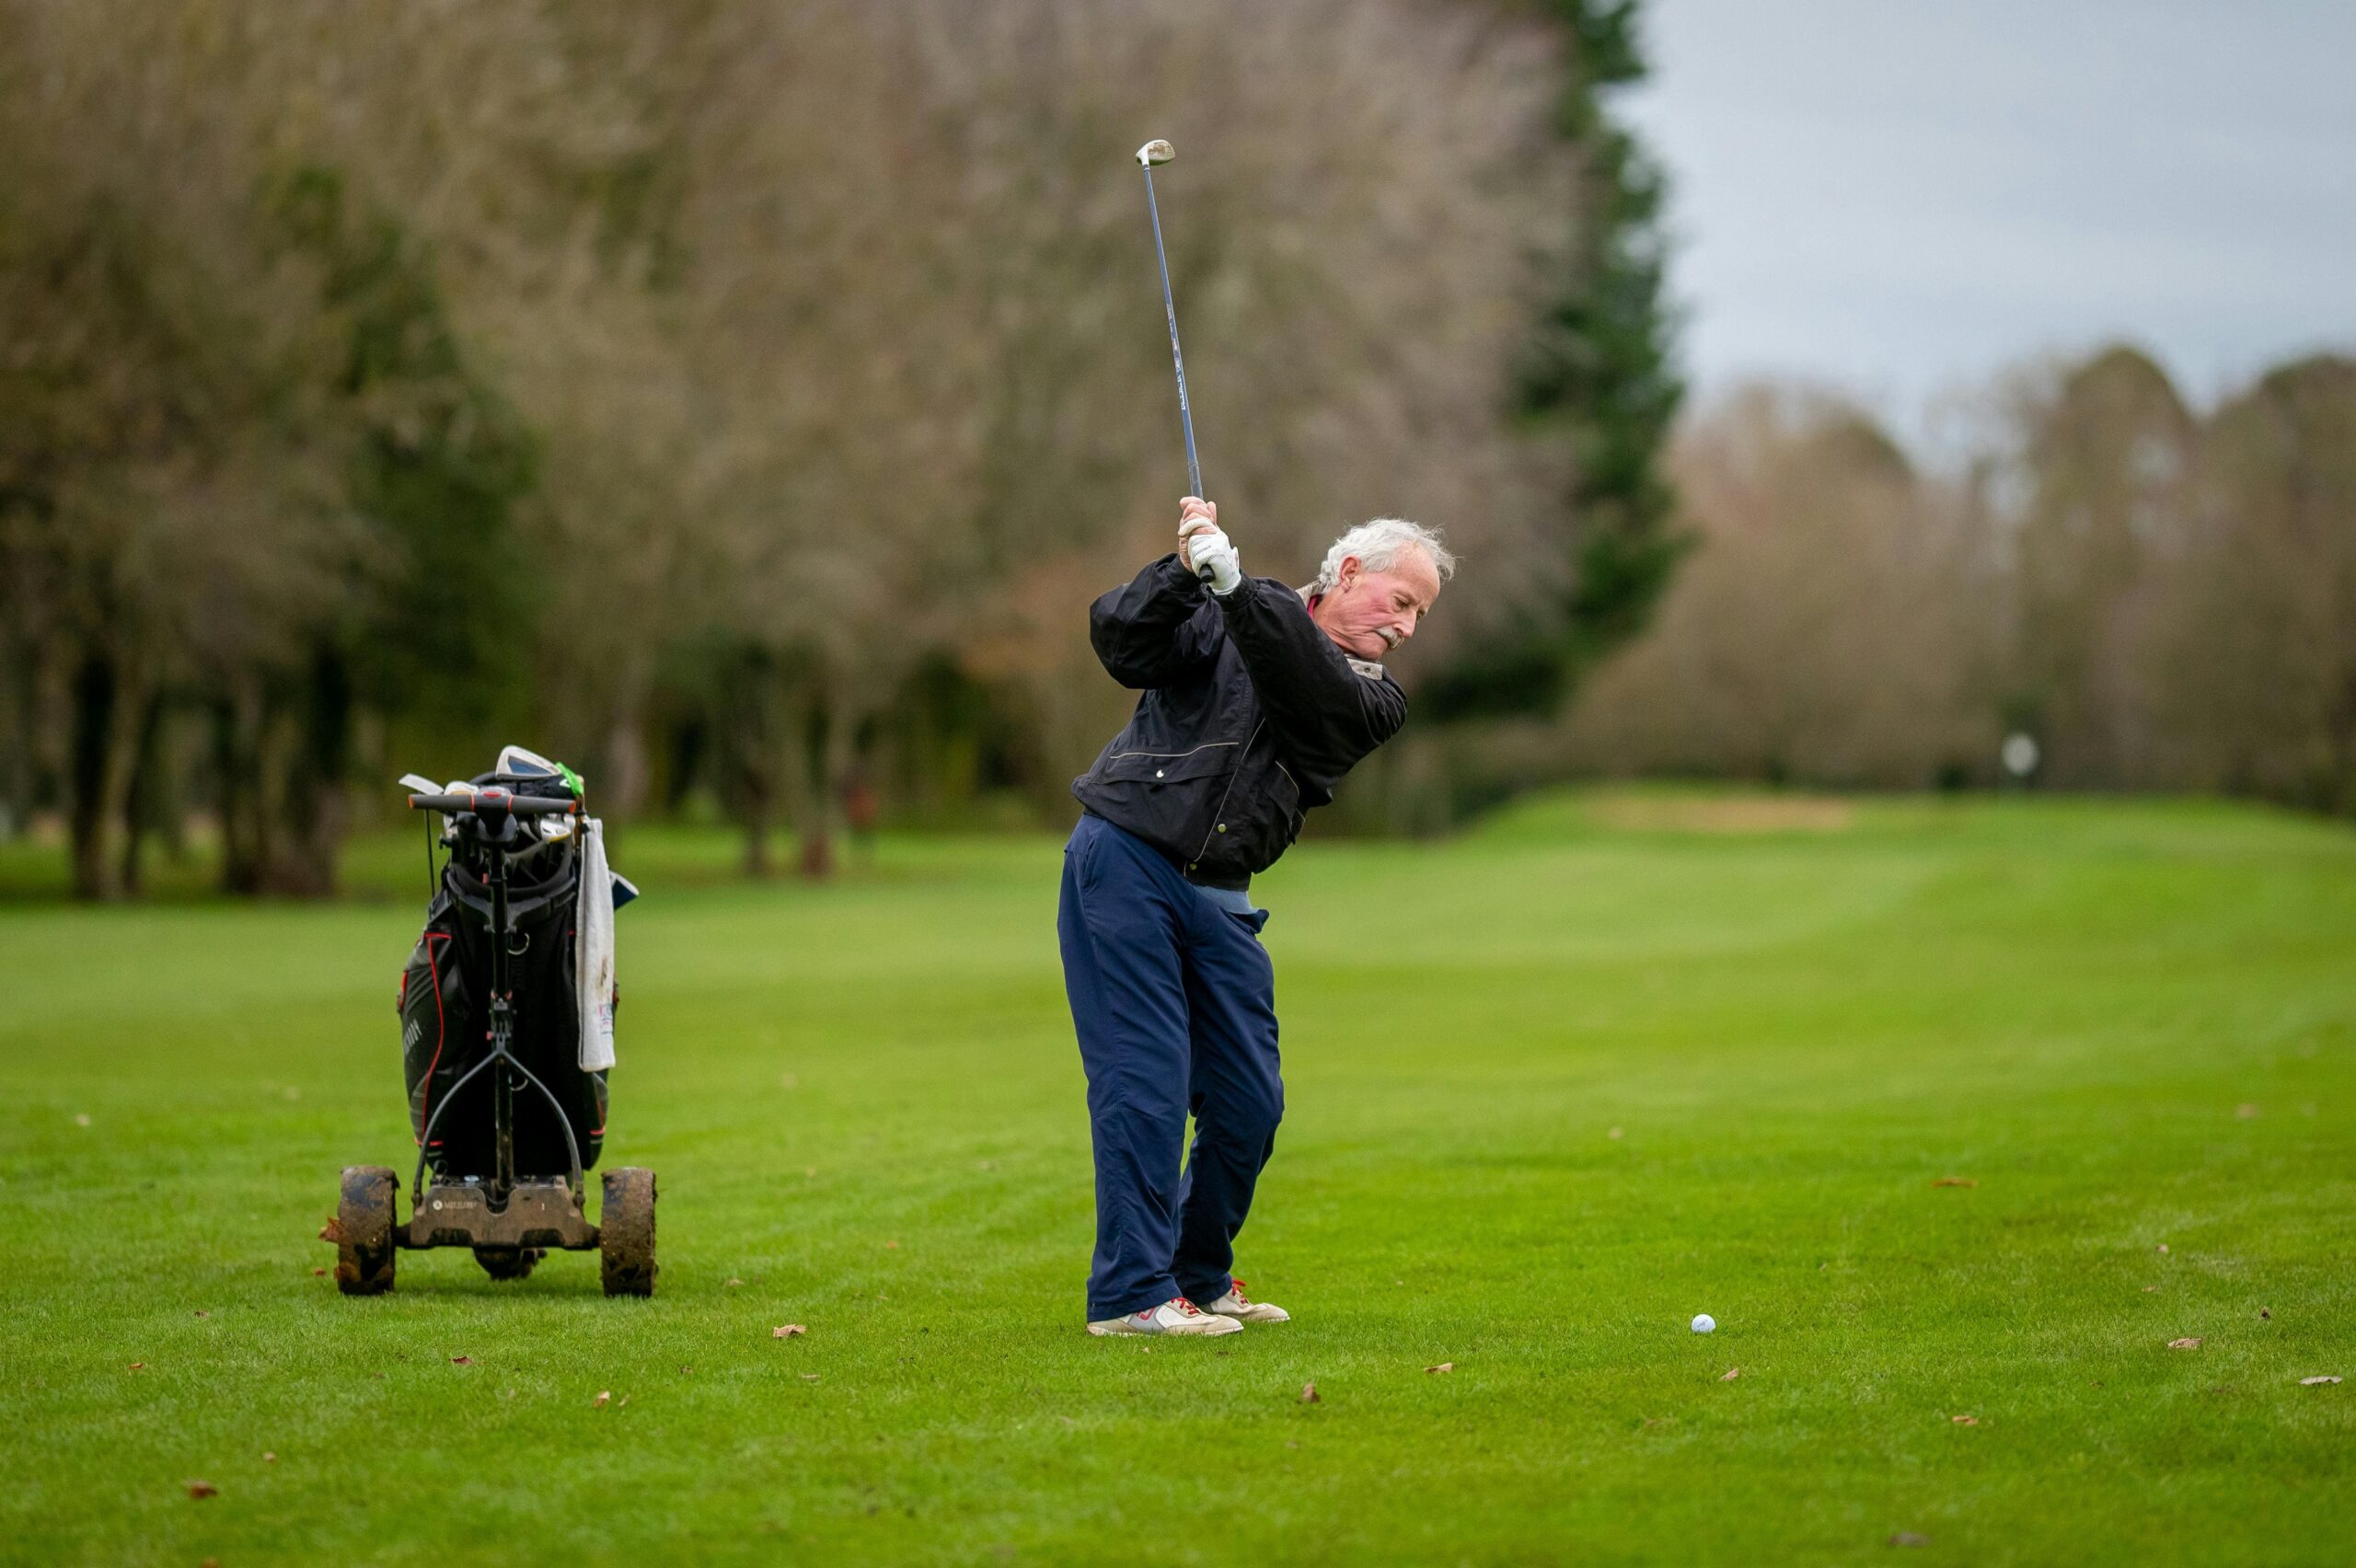 how to increase club head speed for seniors -- Senior hitting ball in the golf course